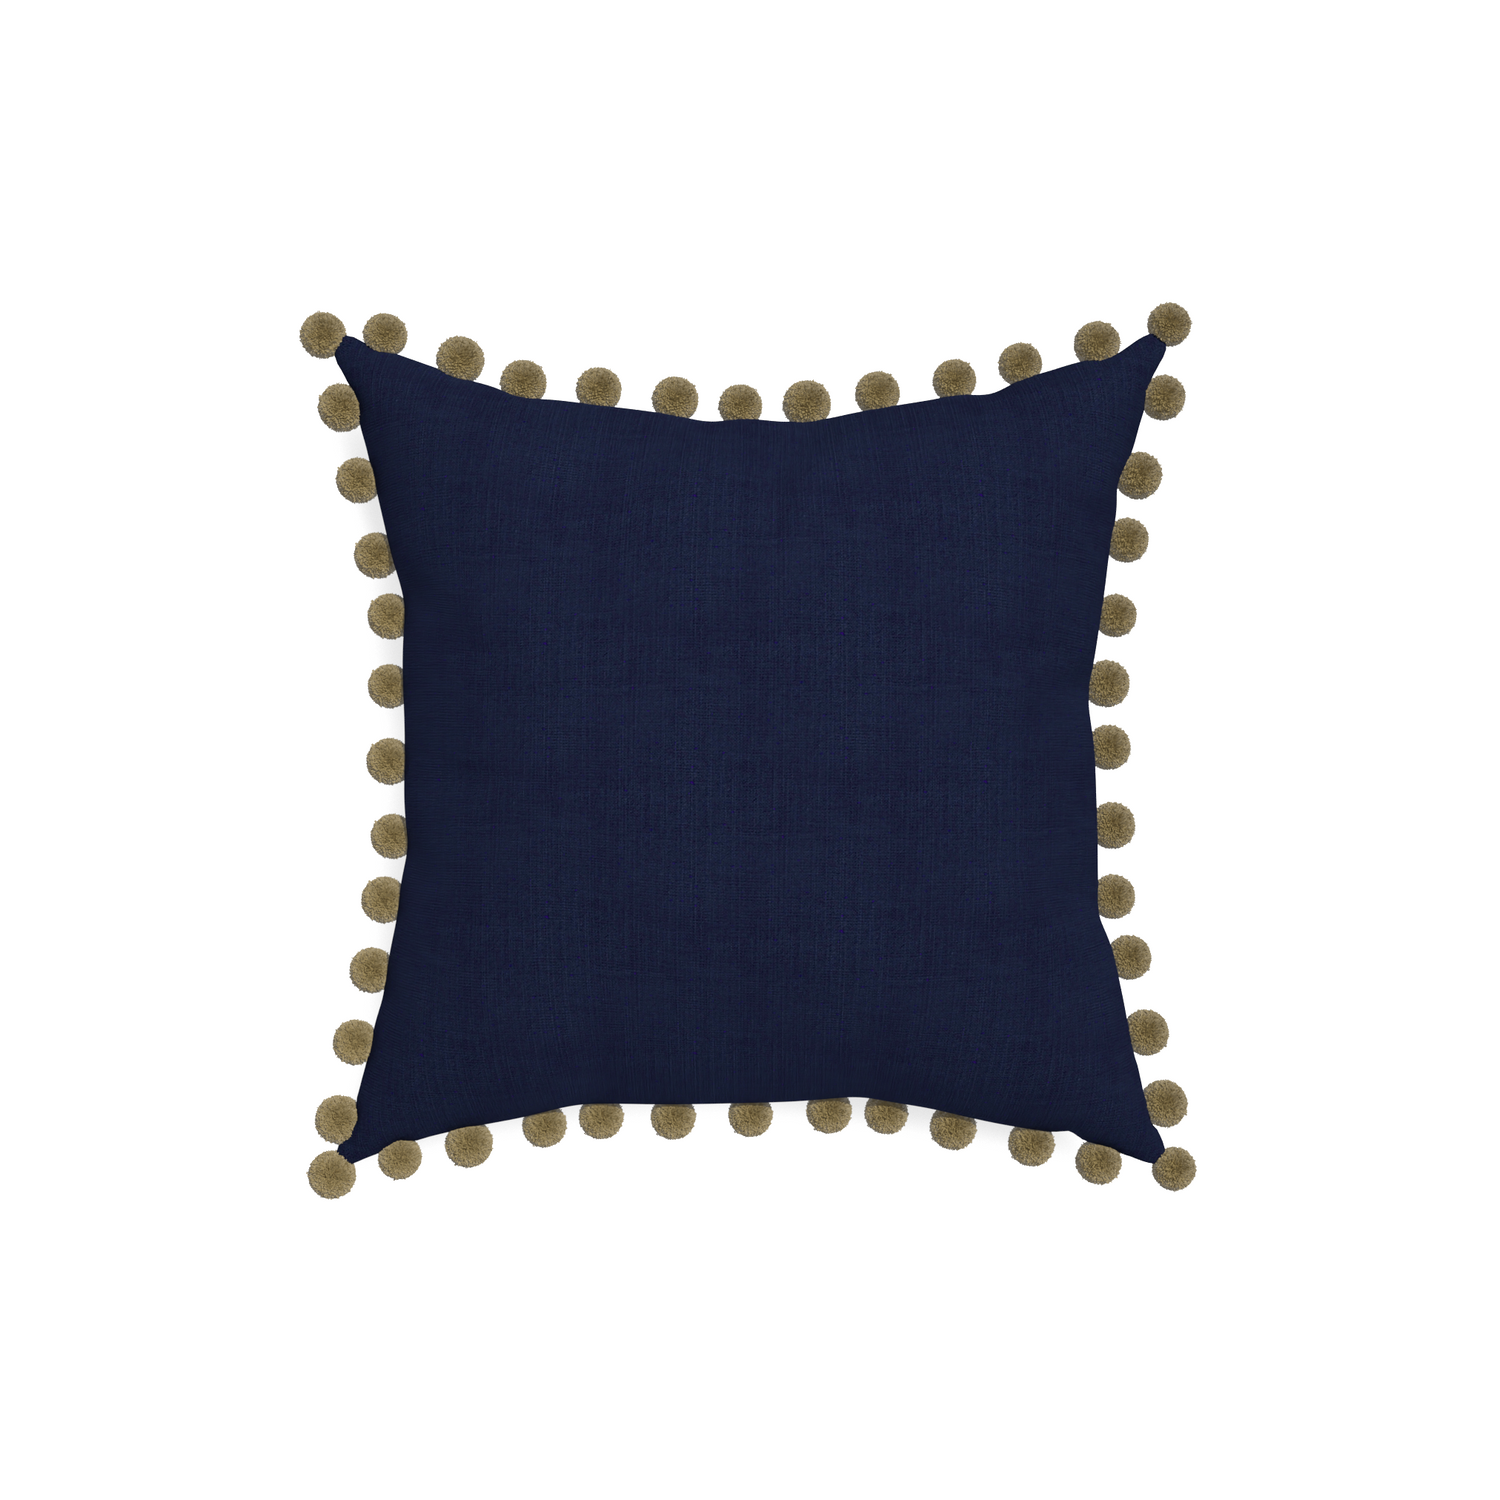 18-square midnight custom pillow with olive pom pom on white background